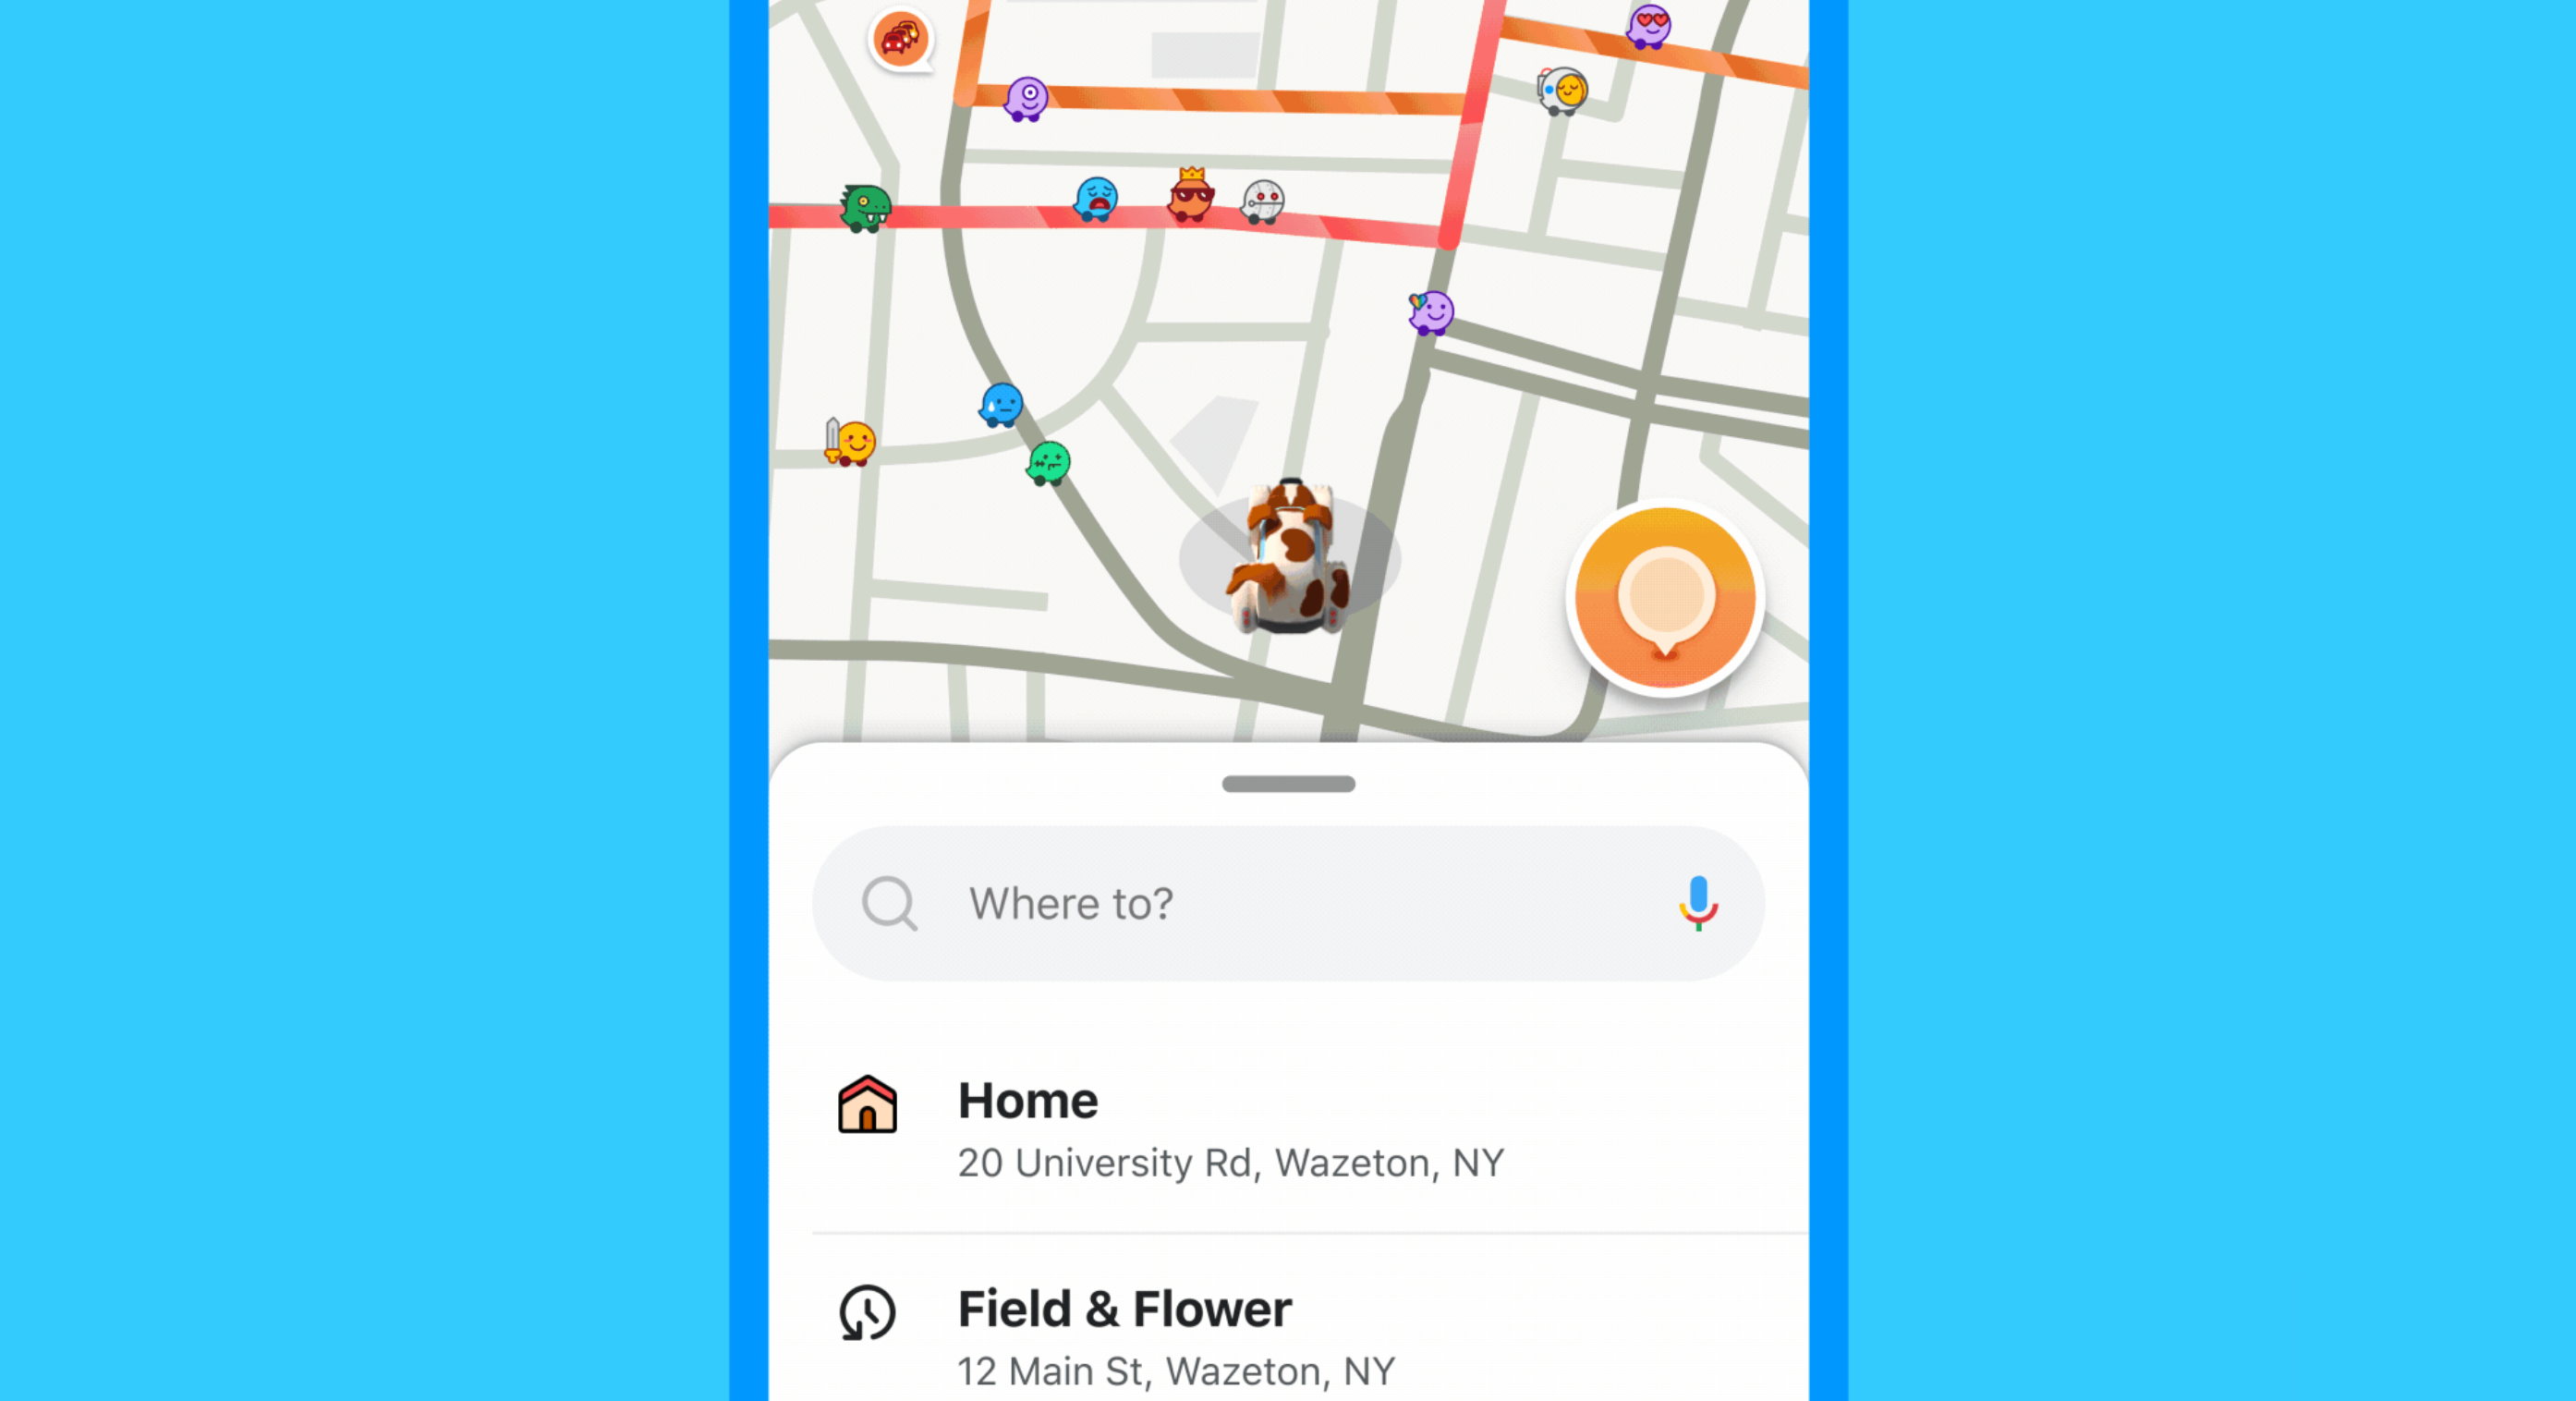 Waze Customize Your Drive screen showing dog icon on navigation screen as a car